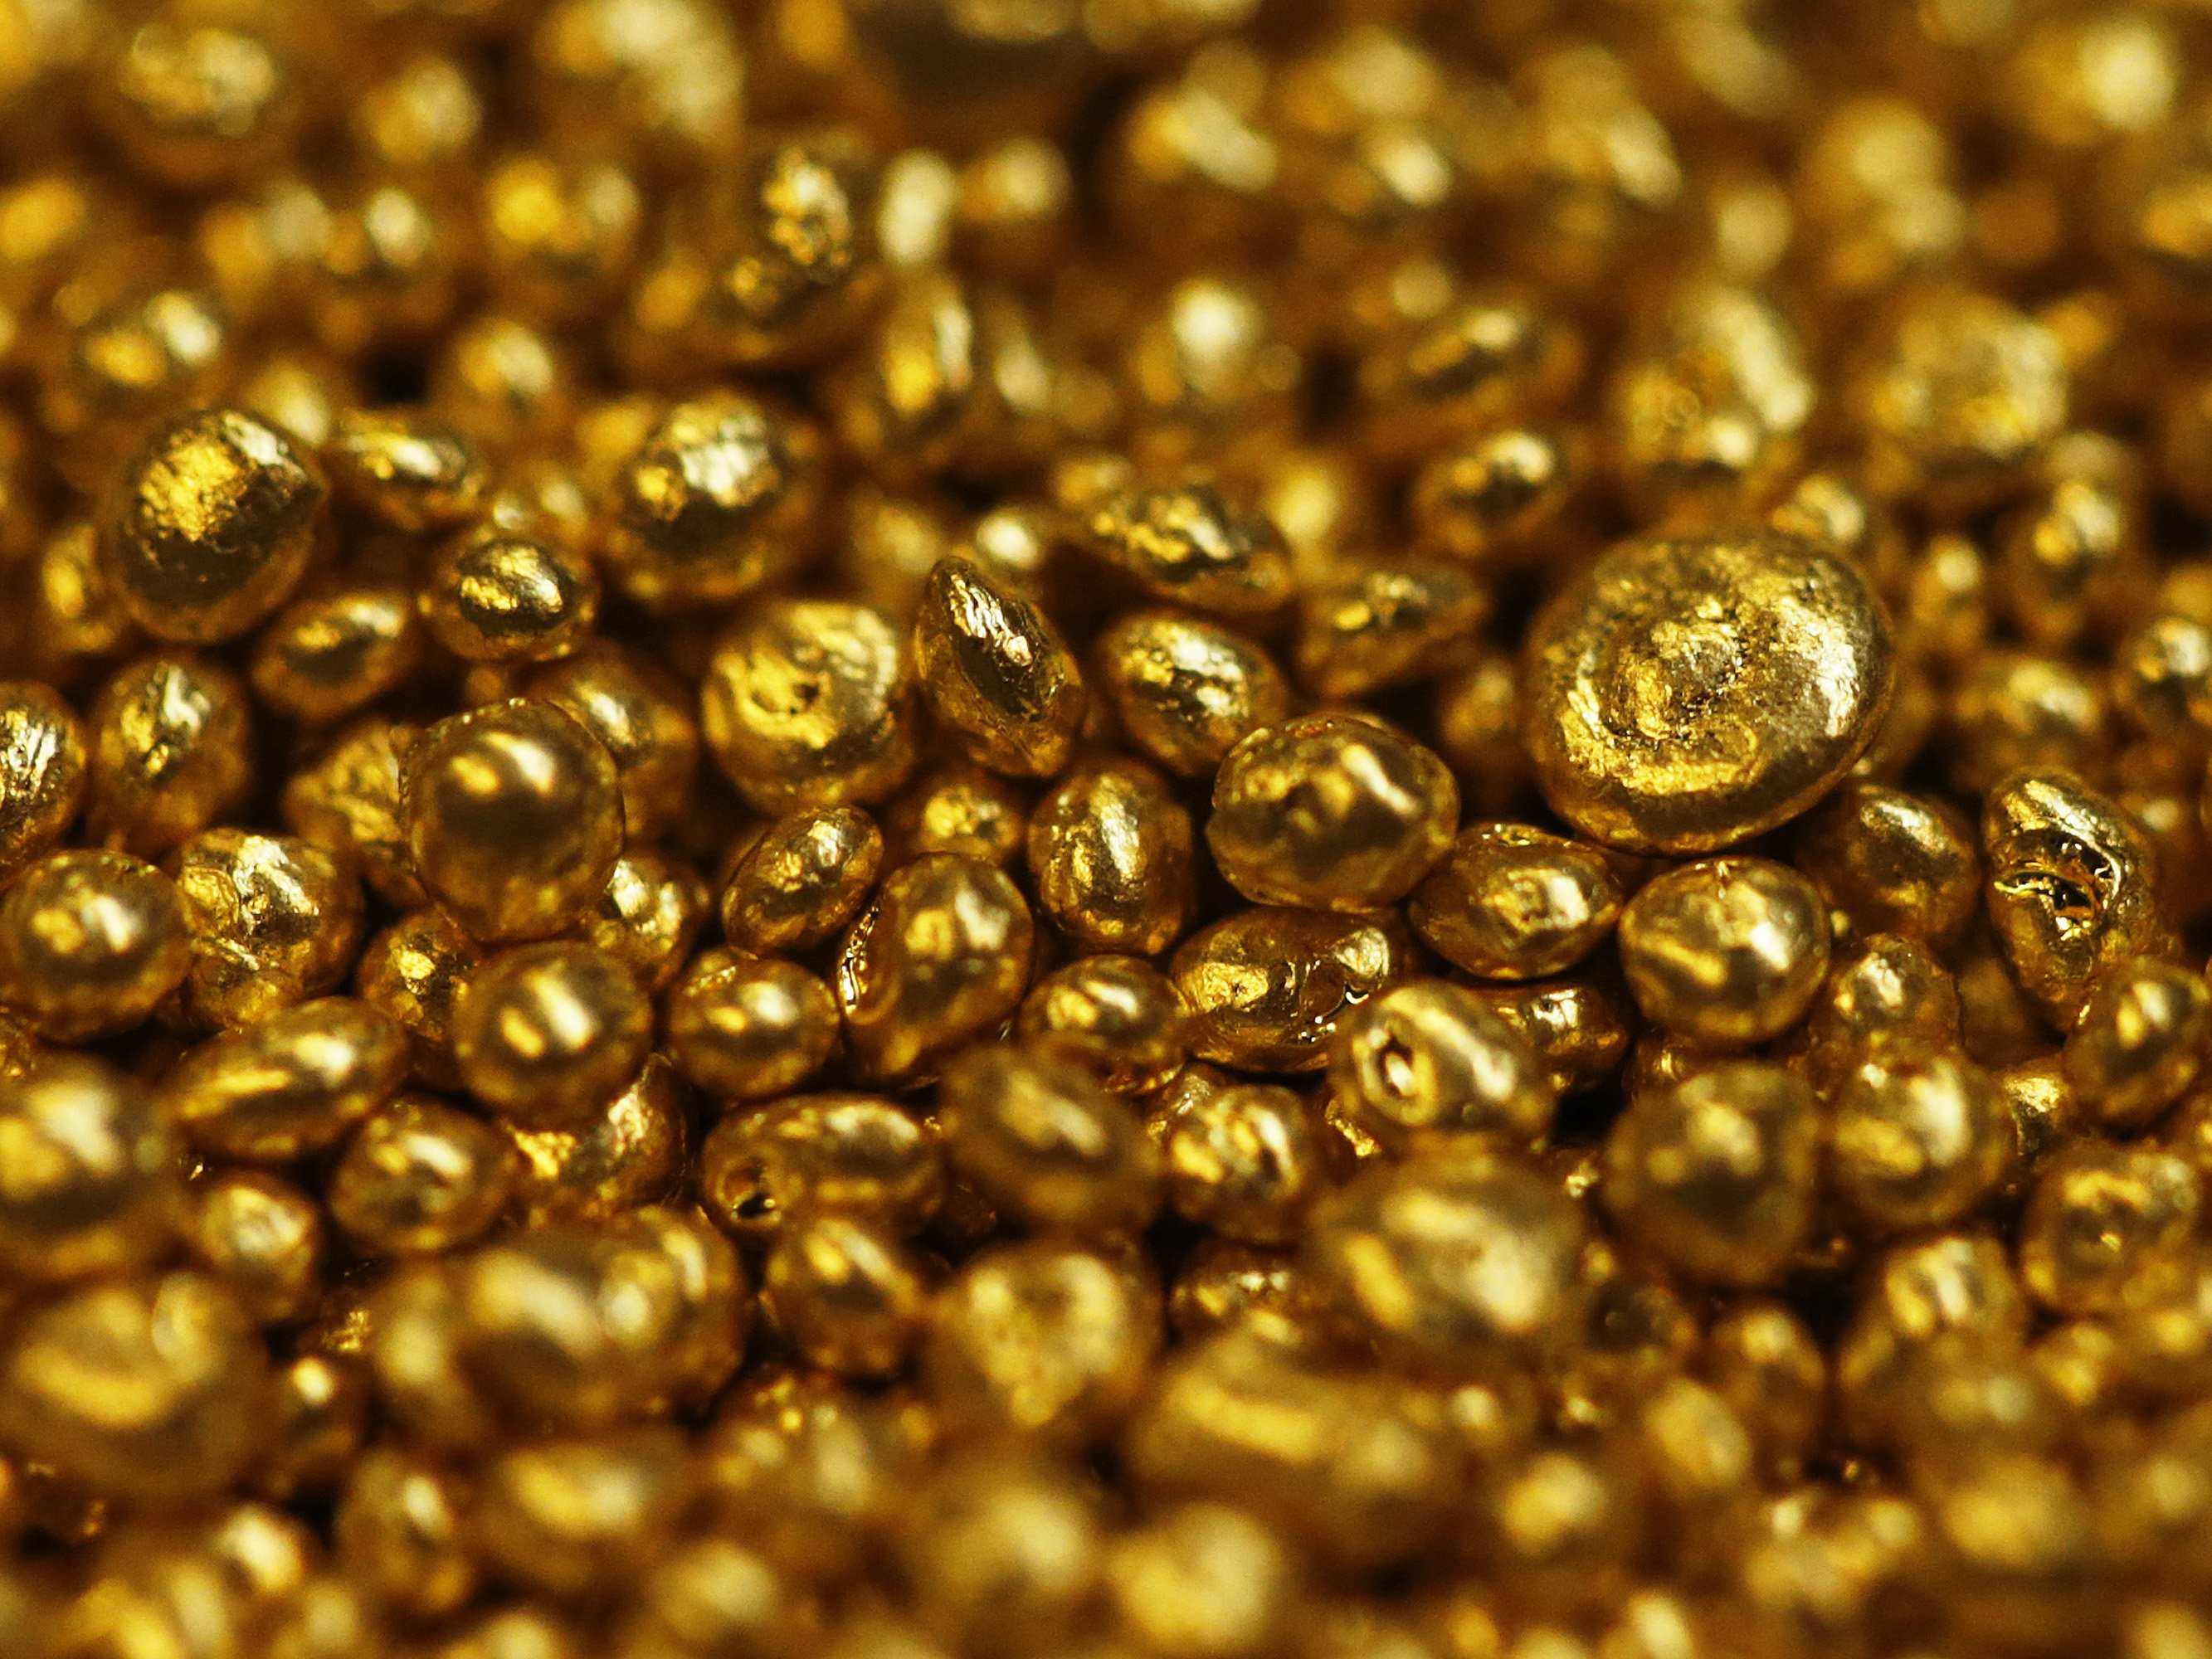 Gold Bars and Coins # 4800x3400. All For Desktop